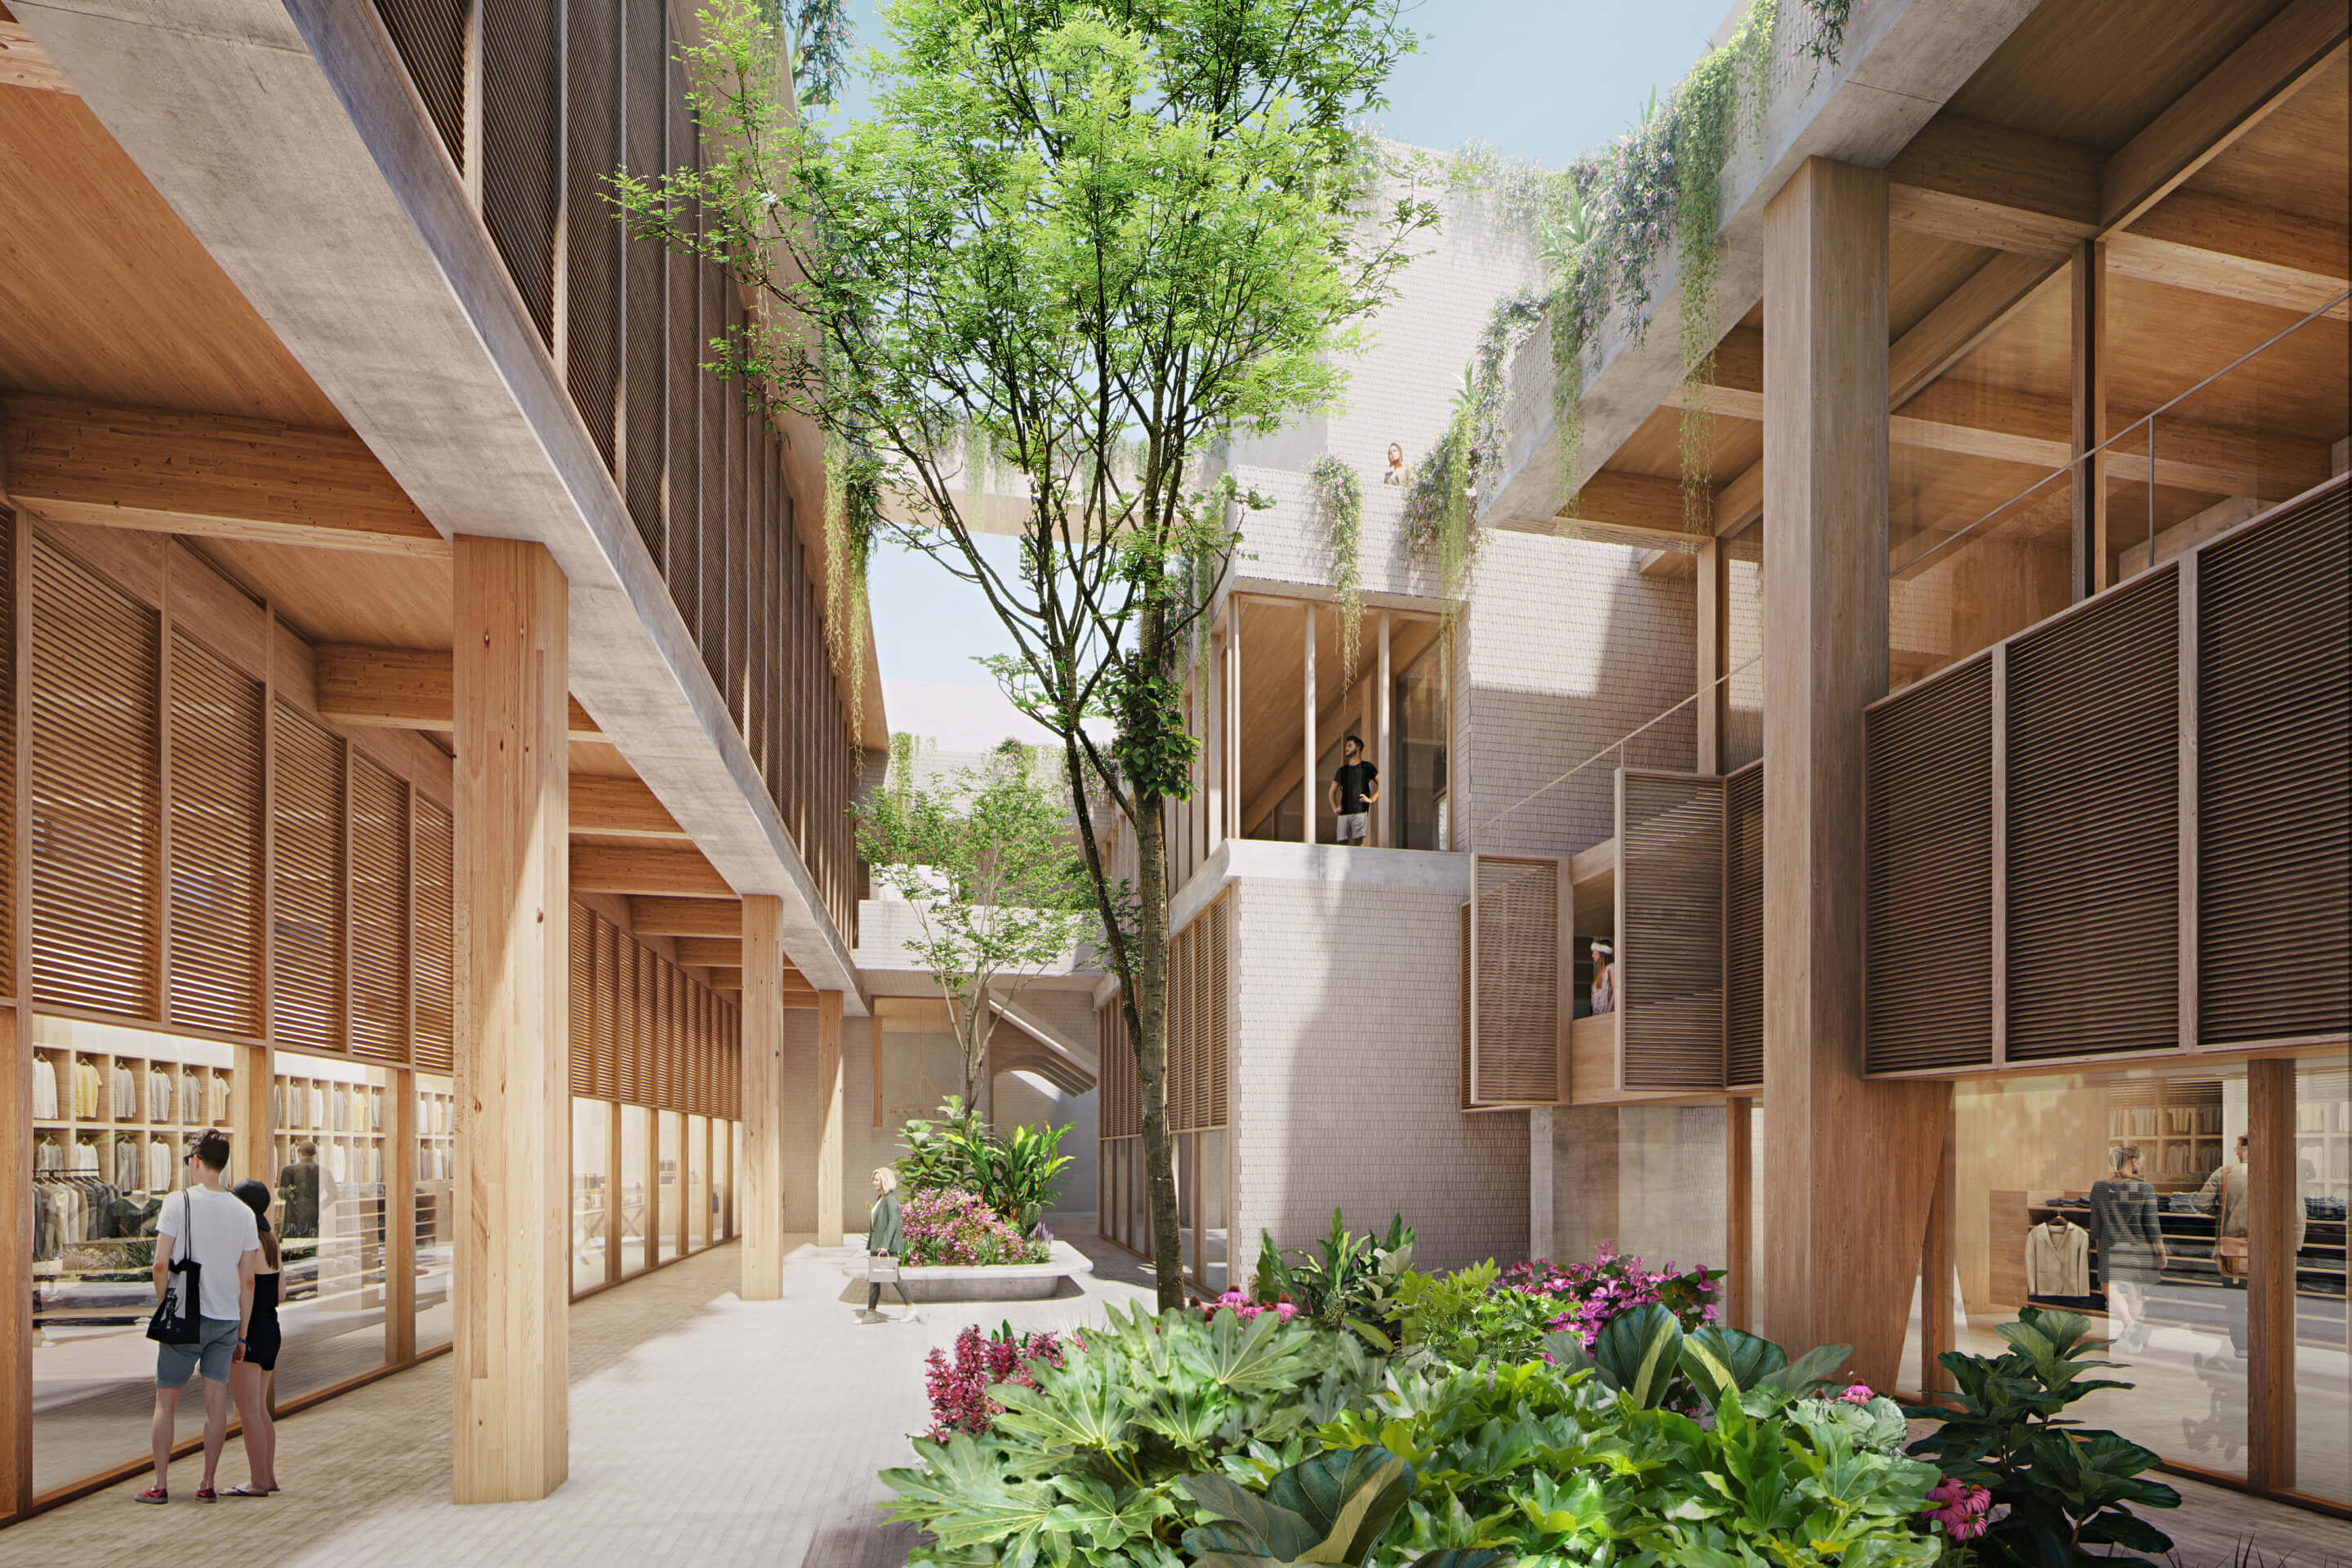 rendering of a leafy courtyard surrounded by timber buildings